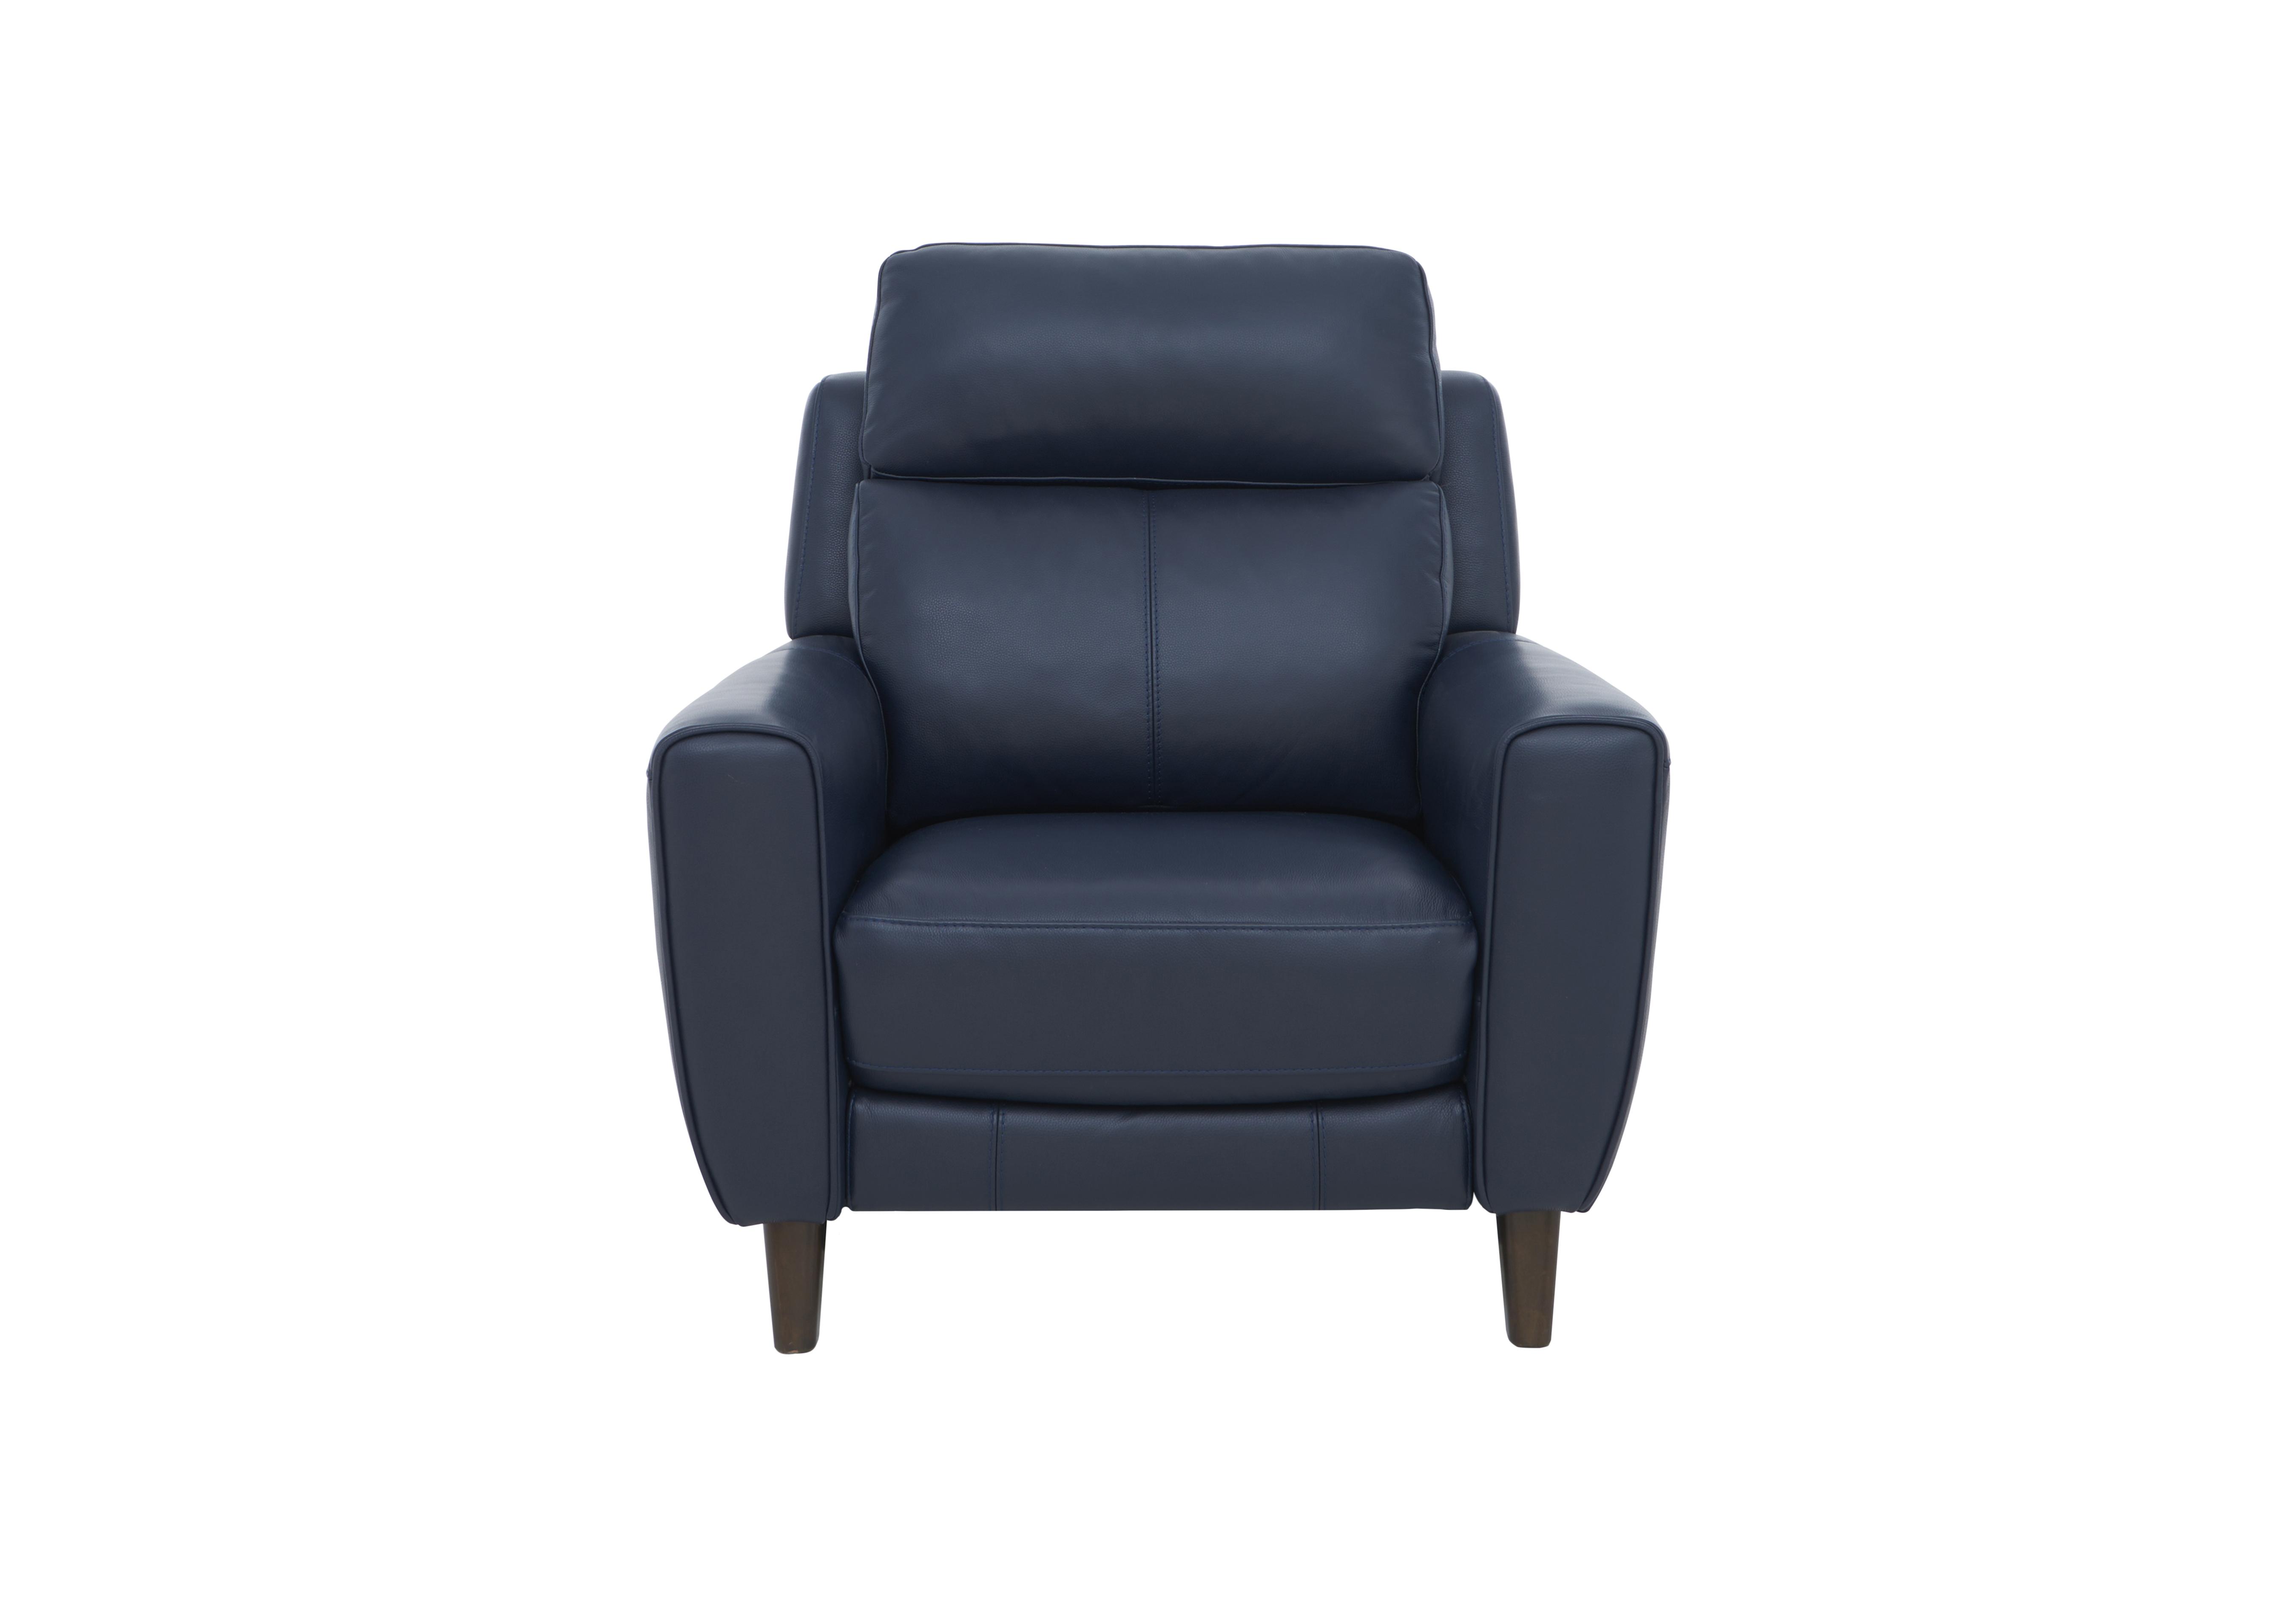 Zen Leather Power Recliner Chair with Power Headrest and Power Lumbar in Bx-036c Navy on Furniture Village